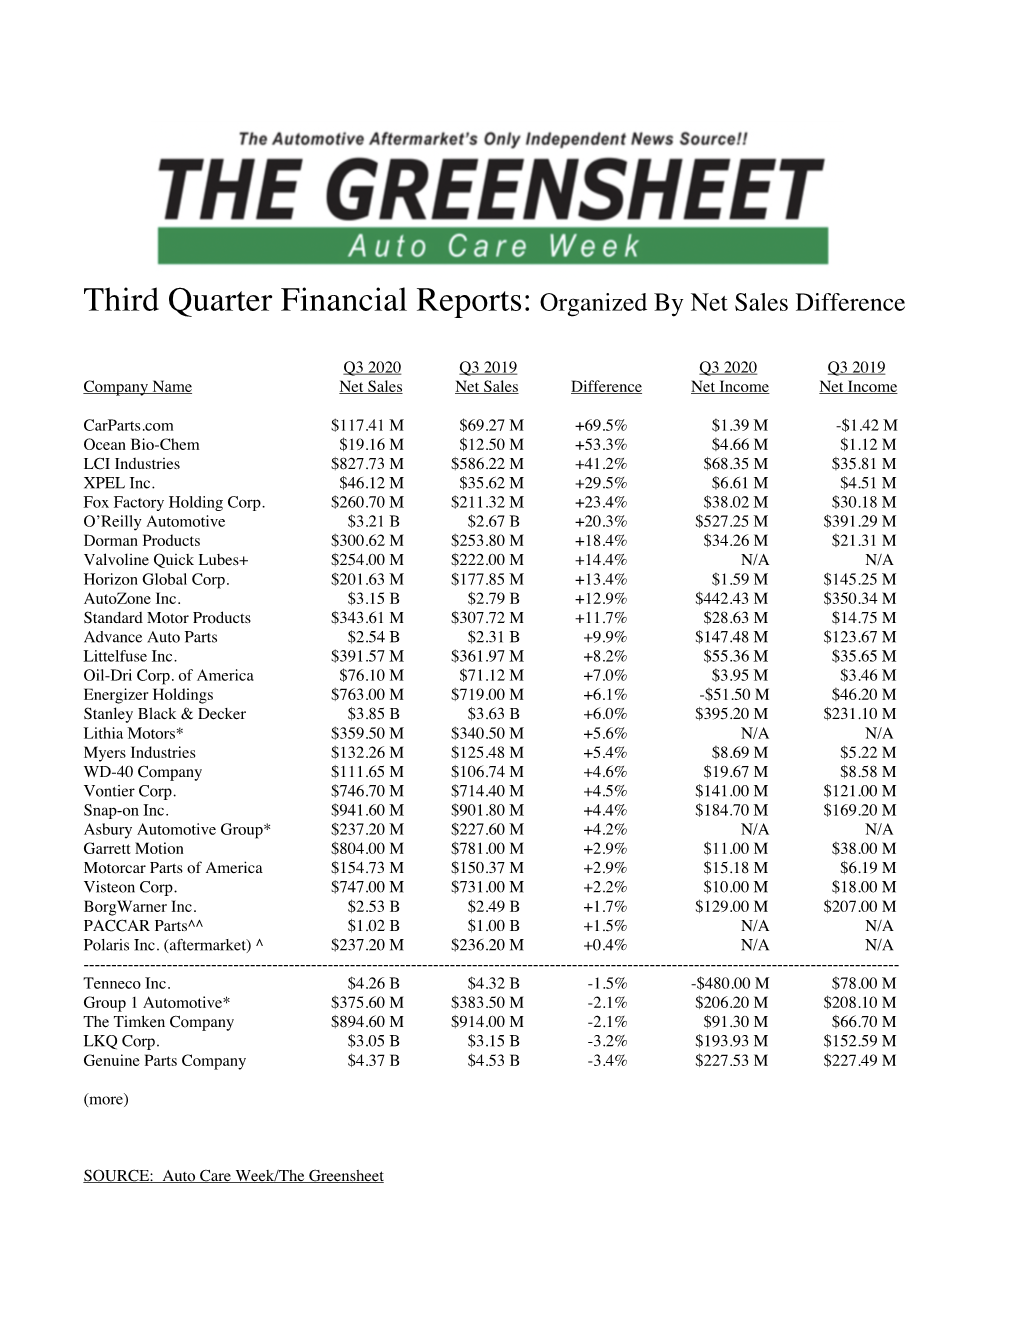 Third Quarter Financial Reports: Organized by Net Sales Difference